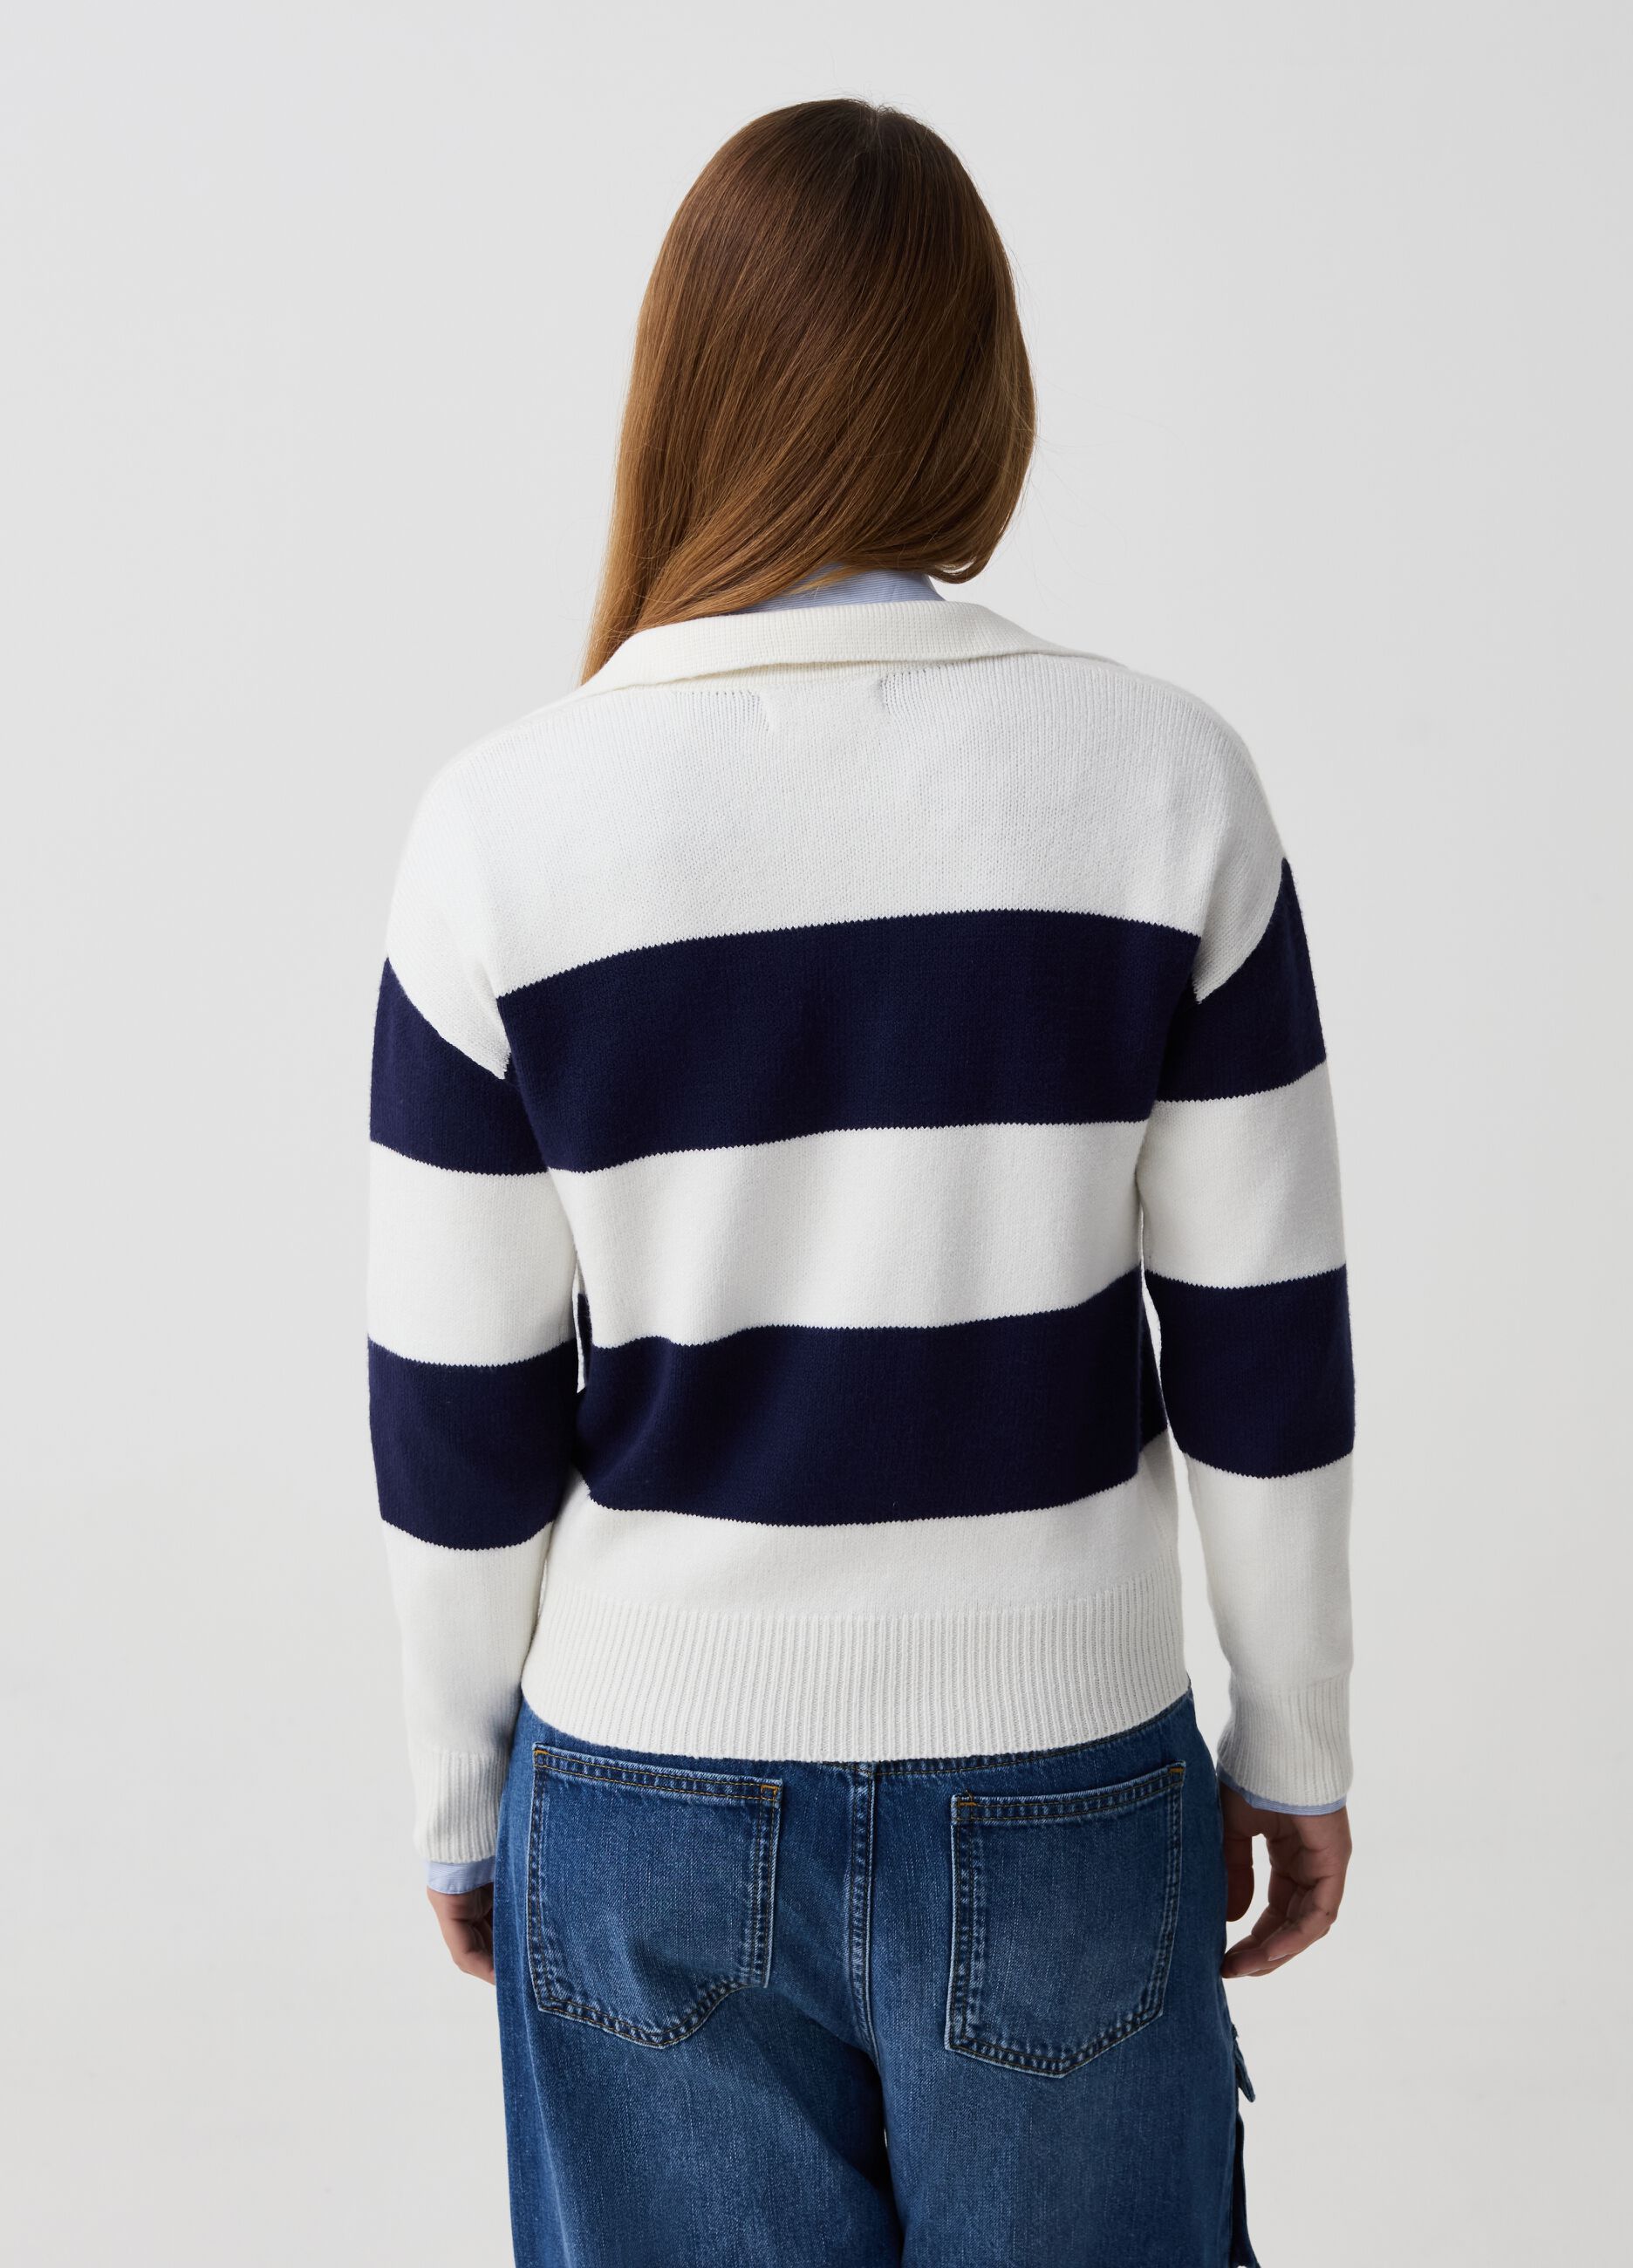 Striped top with polo neck